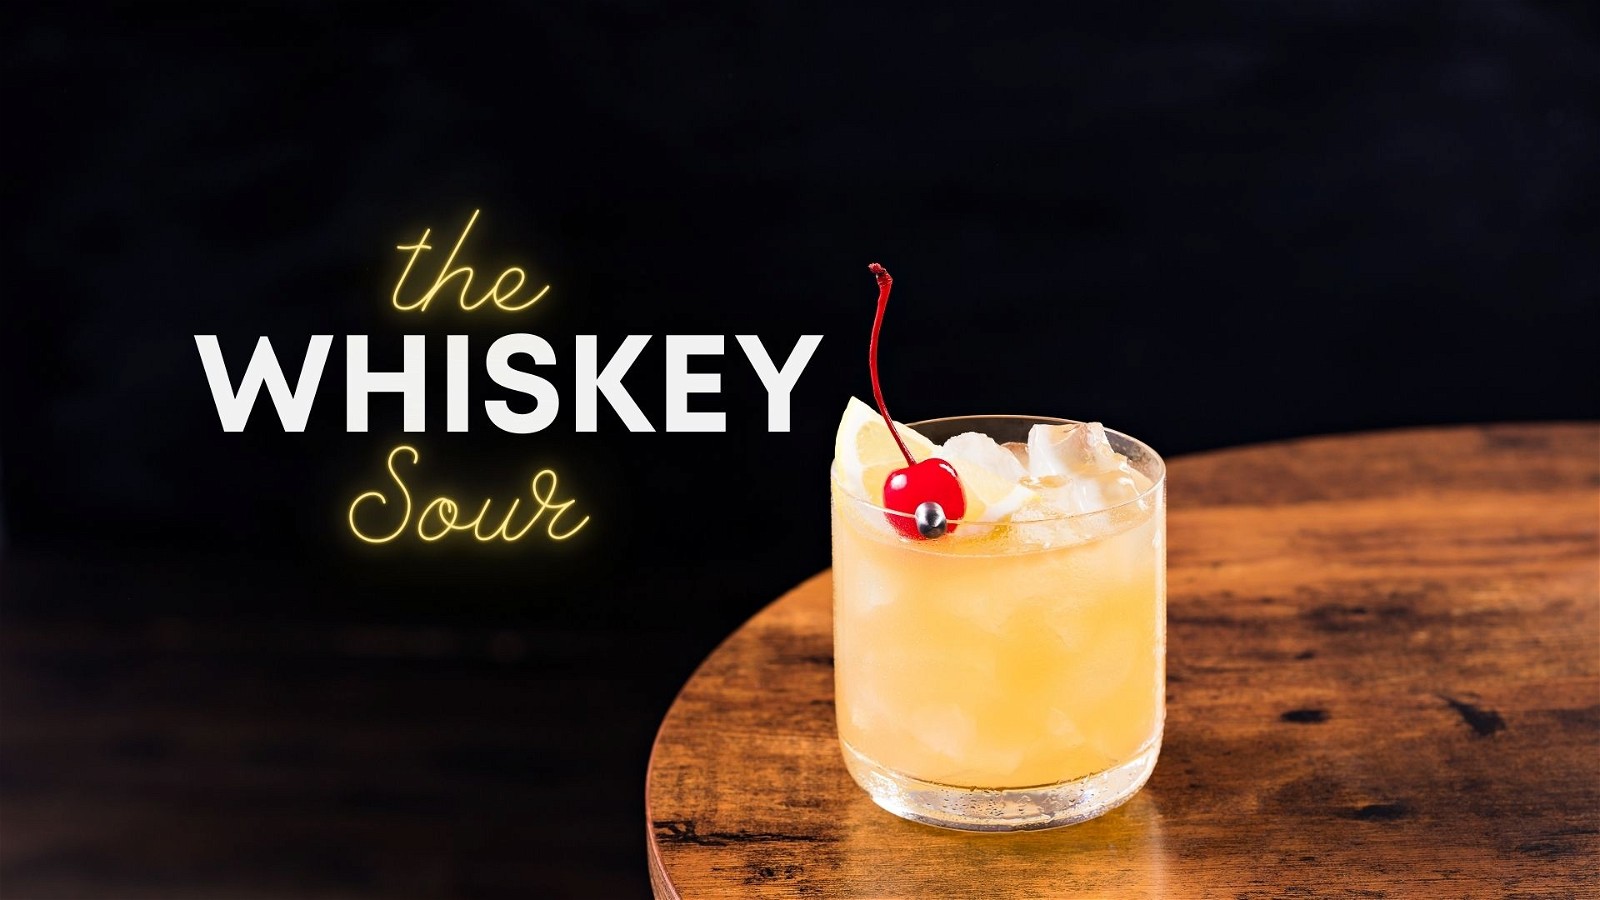 Image of The Whisky Sour